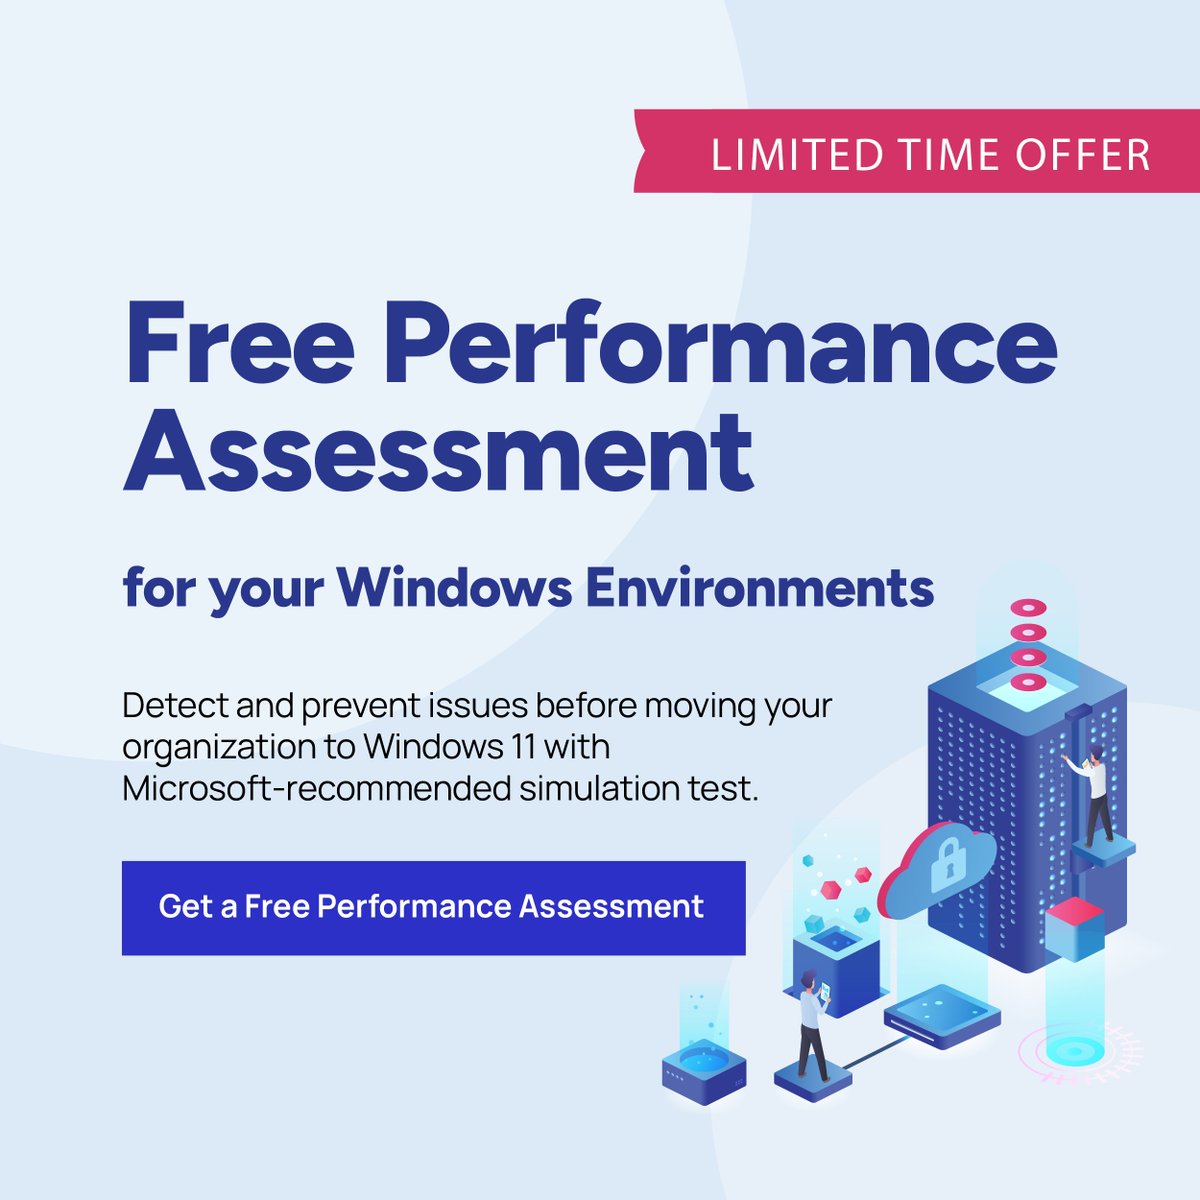 Moving to #Windows11? Save your time, budget, and sanity with our Free Performance Assessment. Don't leave your performance and budget to chance—know before you go!
 
Start here ⚙️🤖: hubs.ly/Q02v1vyG0

#LoginVSI #windows10 #LoginEnterprise #EUC #VDI #DaaS